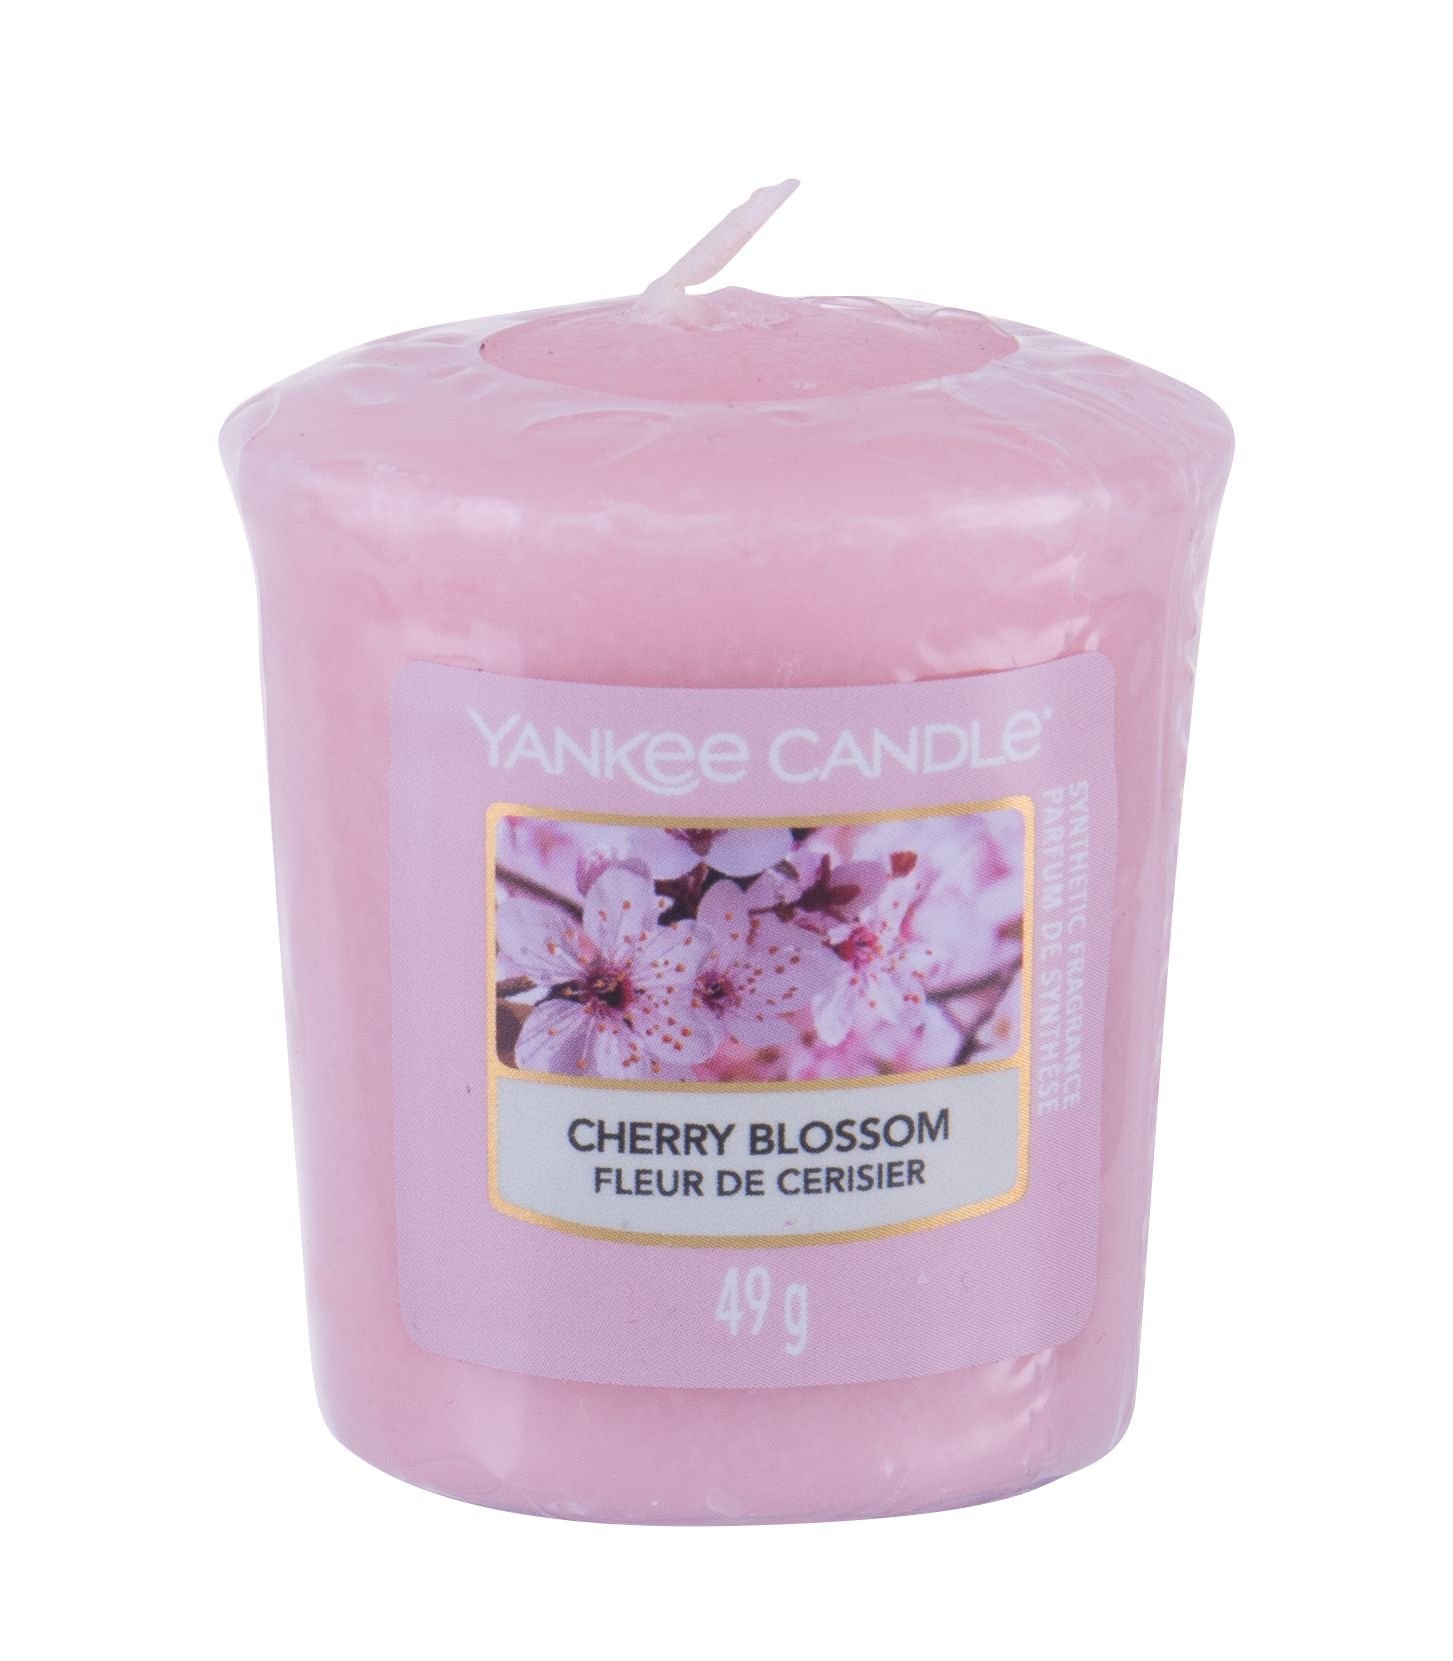 Yankee Candle Cherry Blossom 49g Kvepalai Unisex Scented Candle